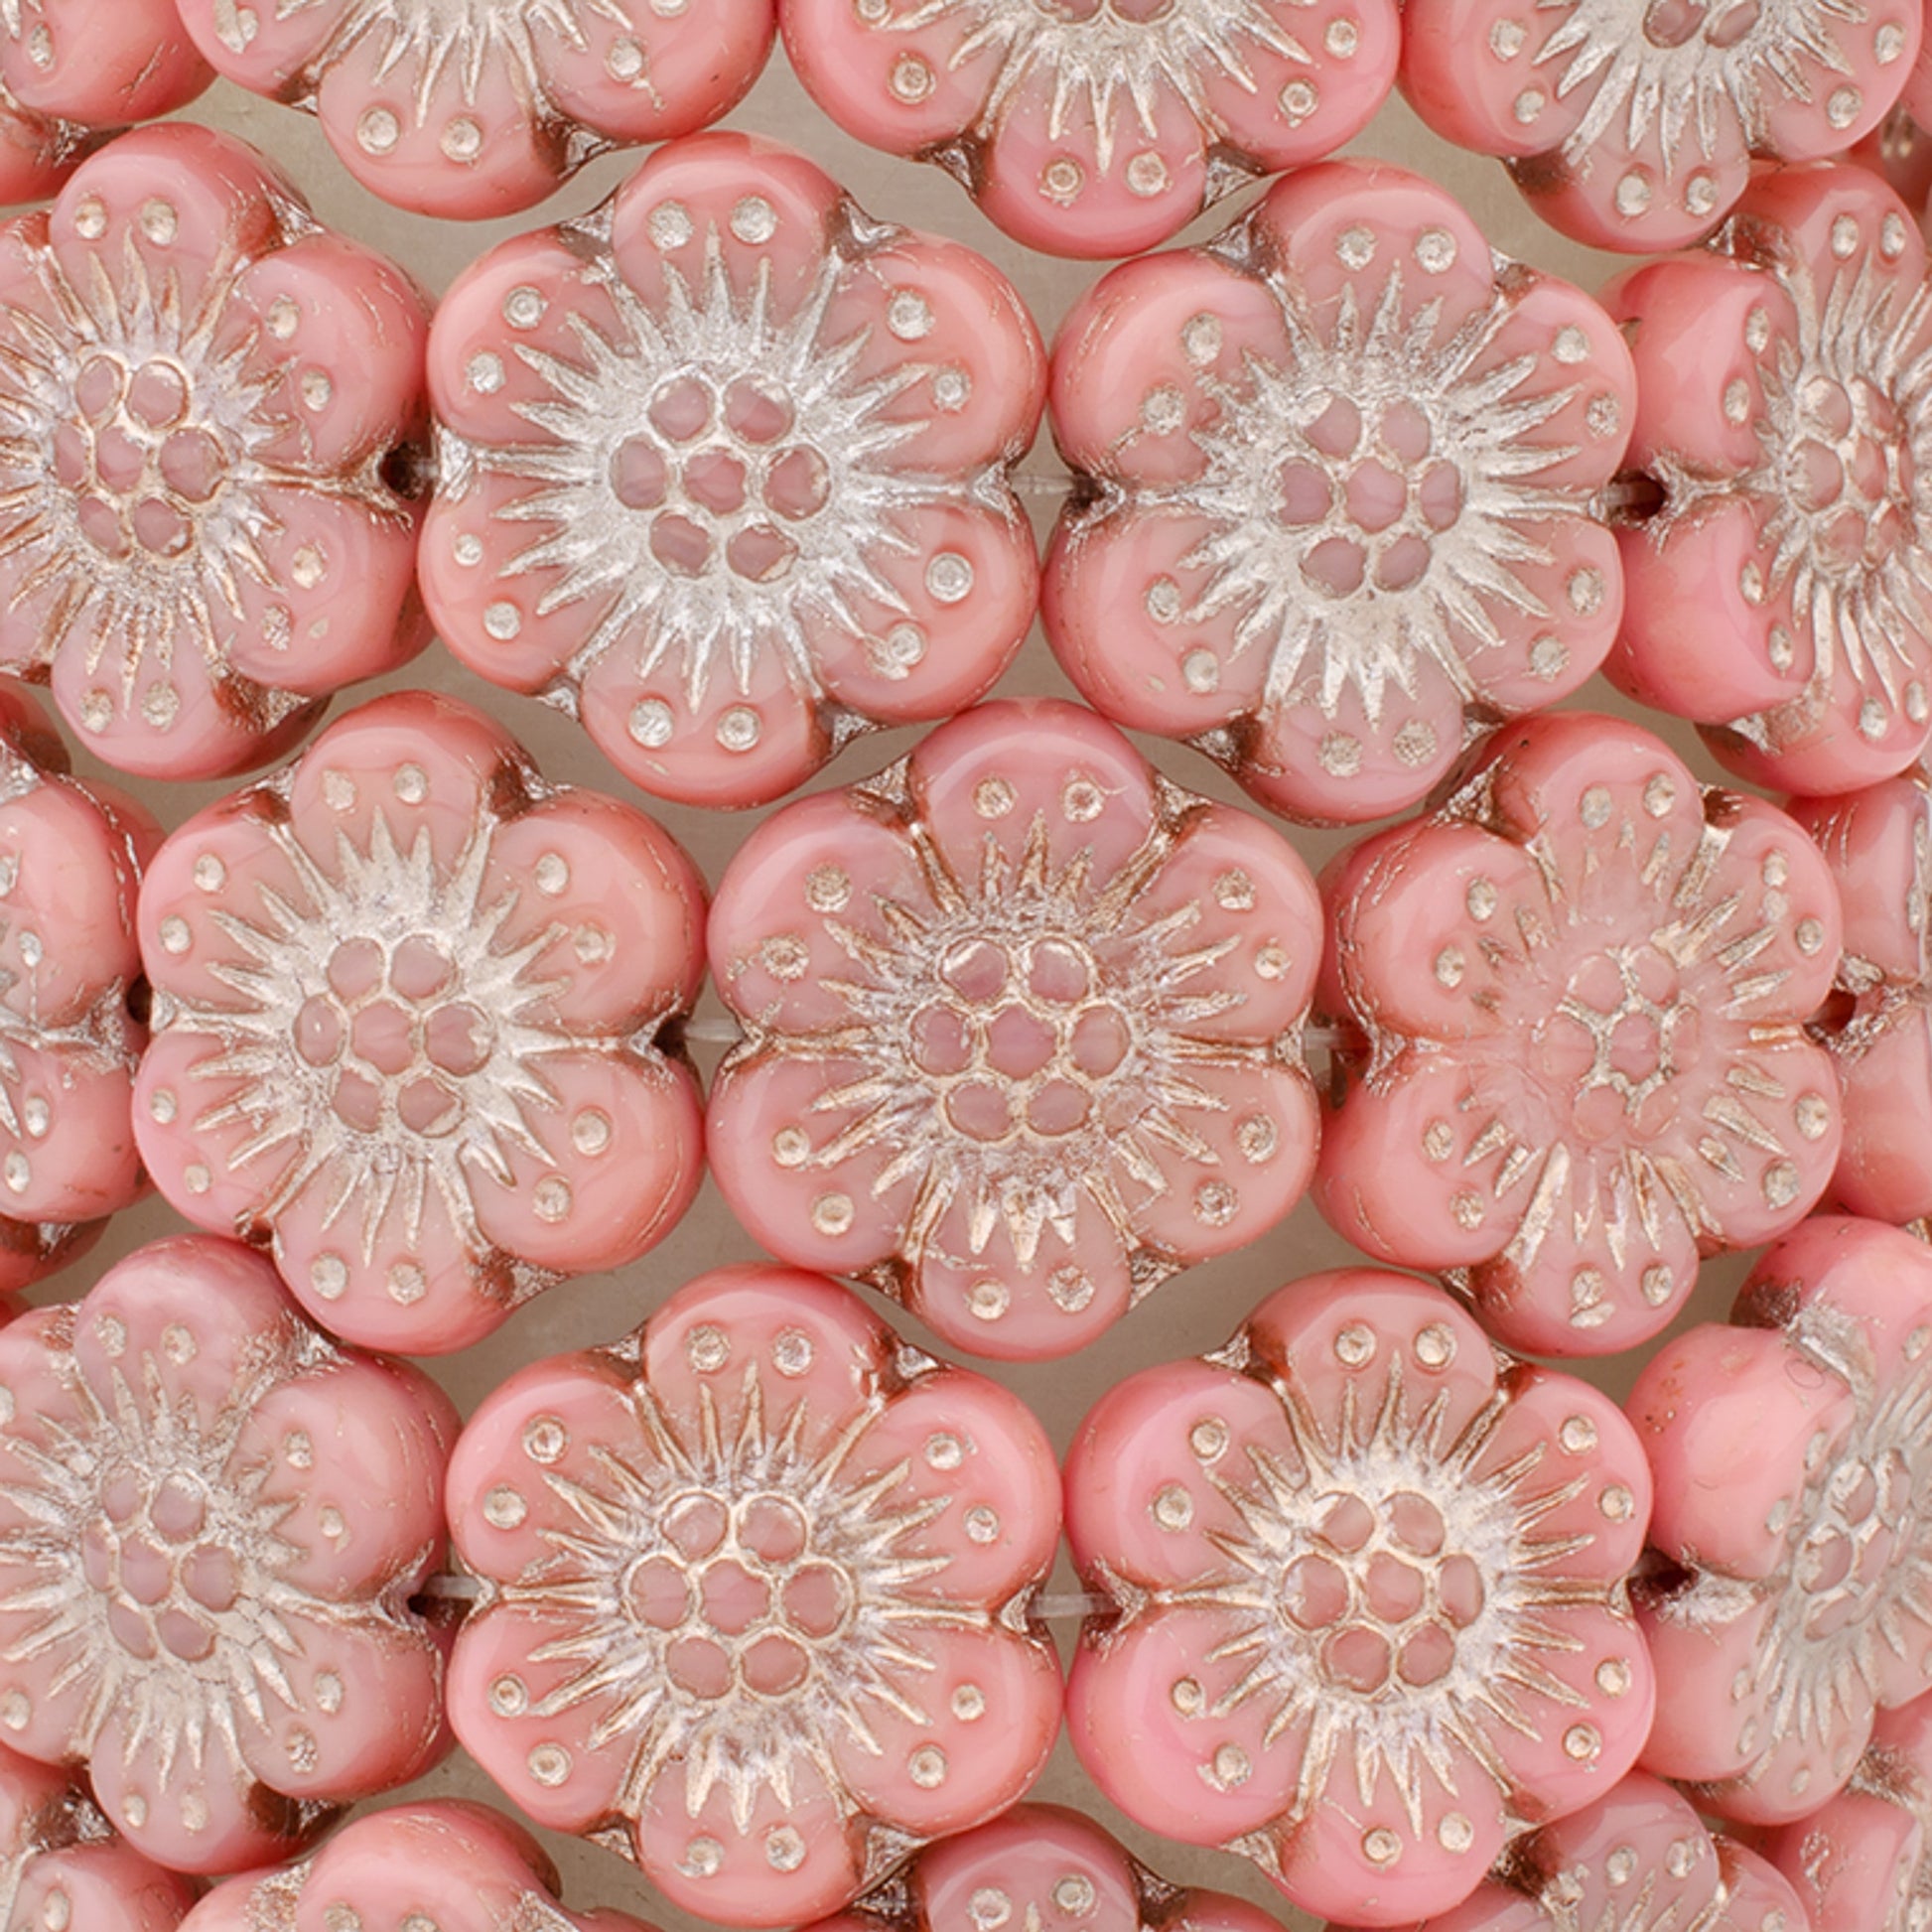 14mm Pink with Platinum Wash Wildflower Glass Bead - 6 pcs.-The Bead Gallery Honolulu